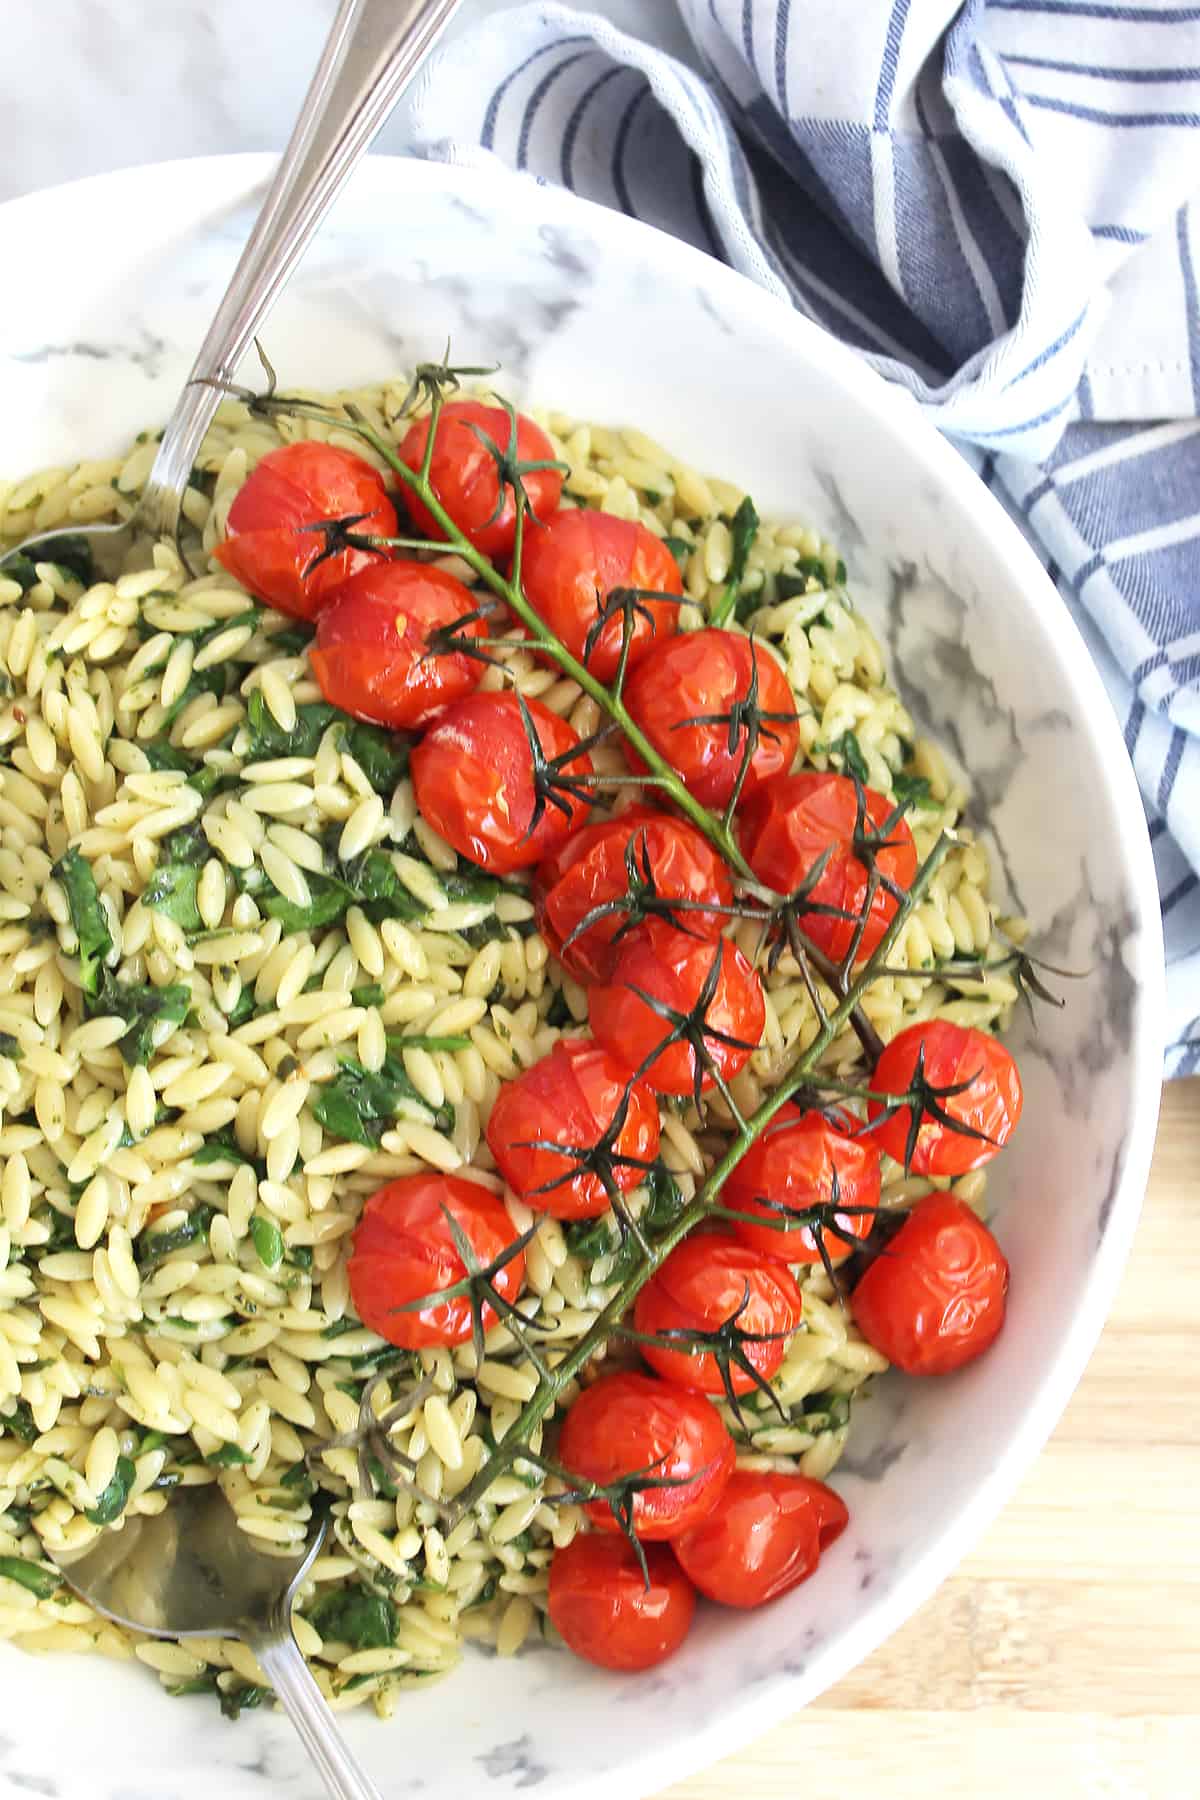 Roasted tomatoes on a bed of spinach orzo salad